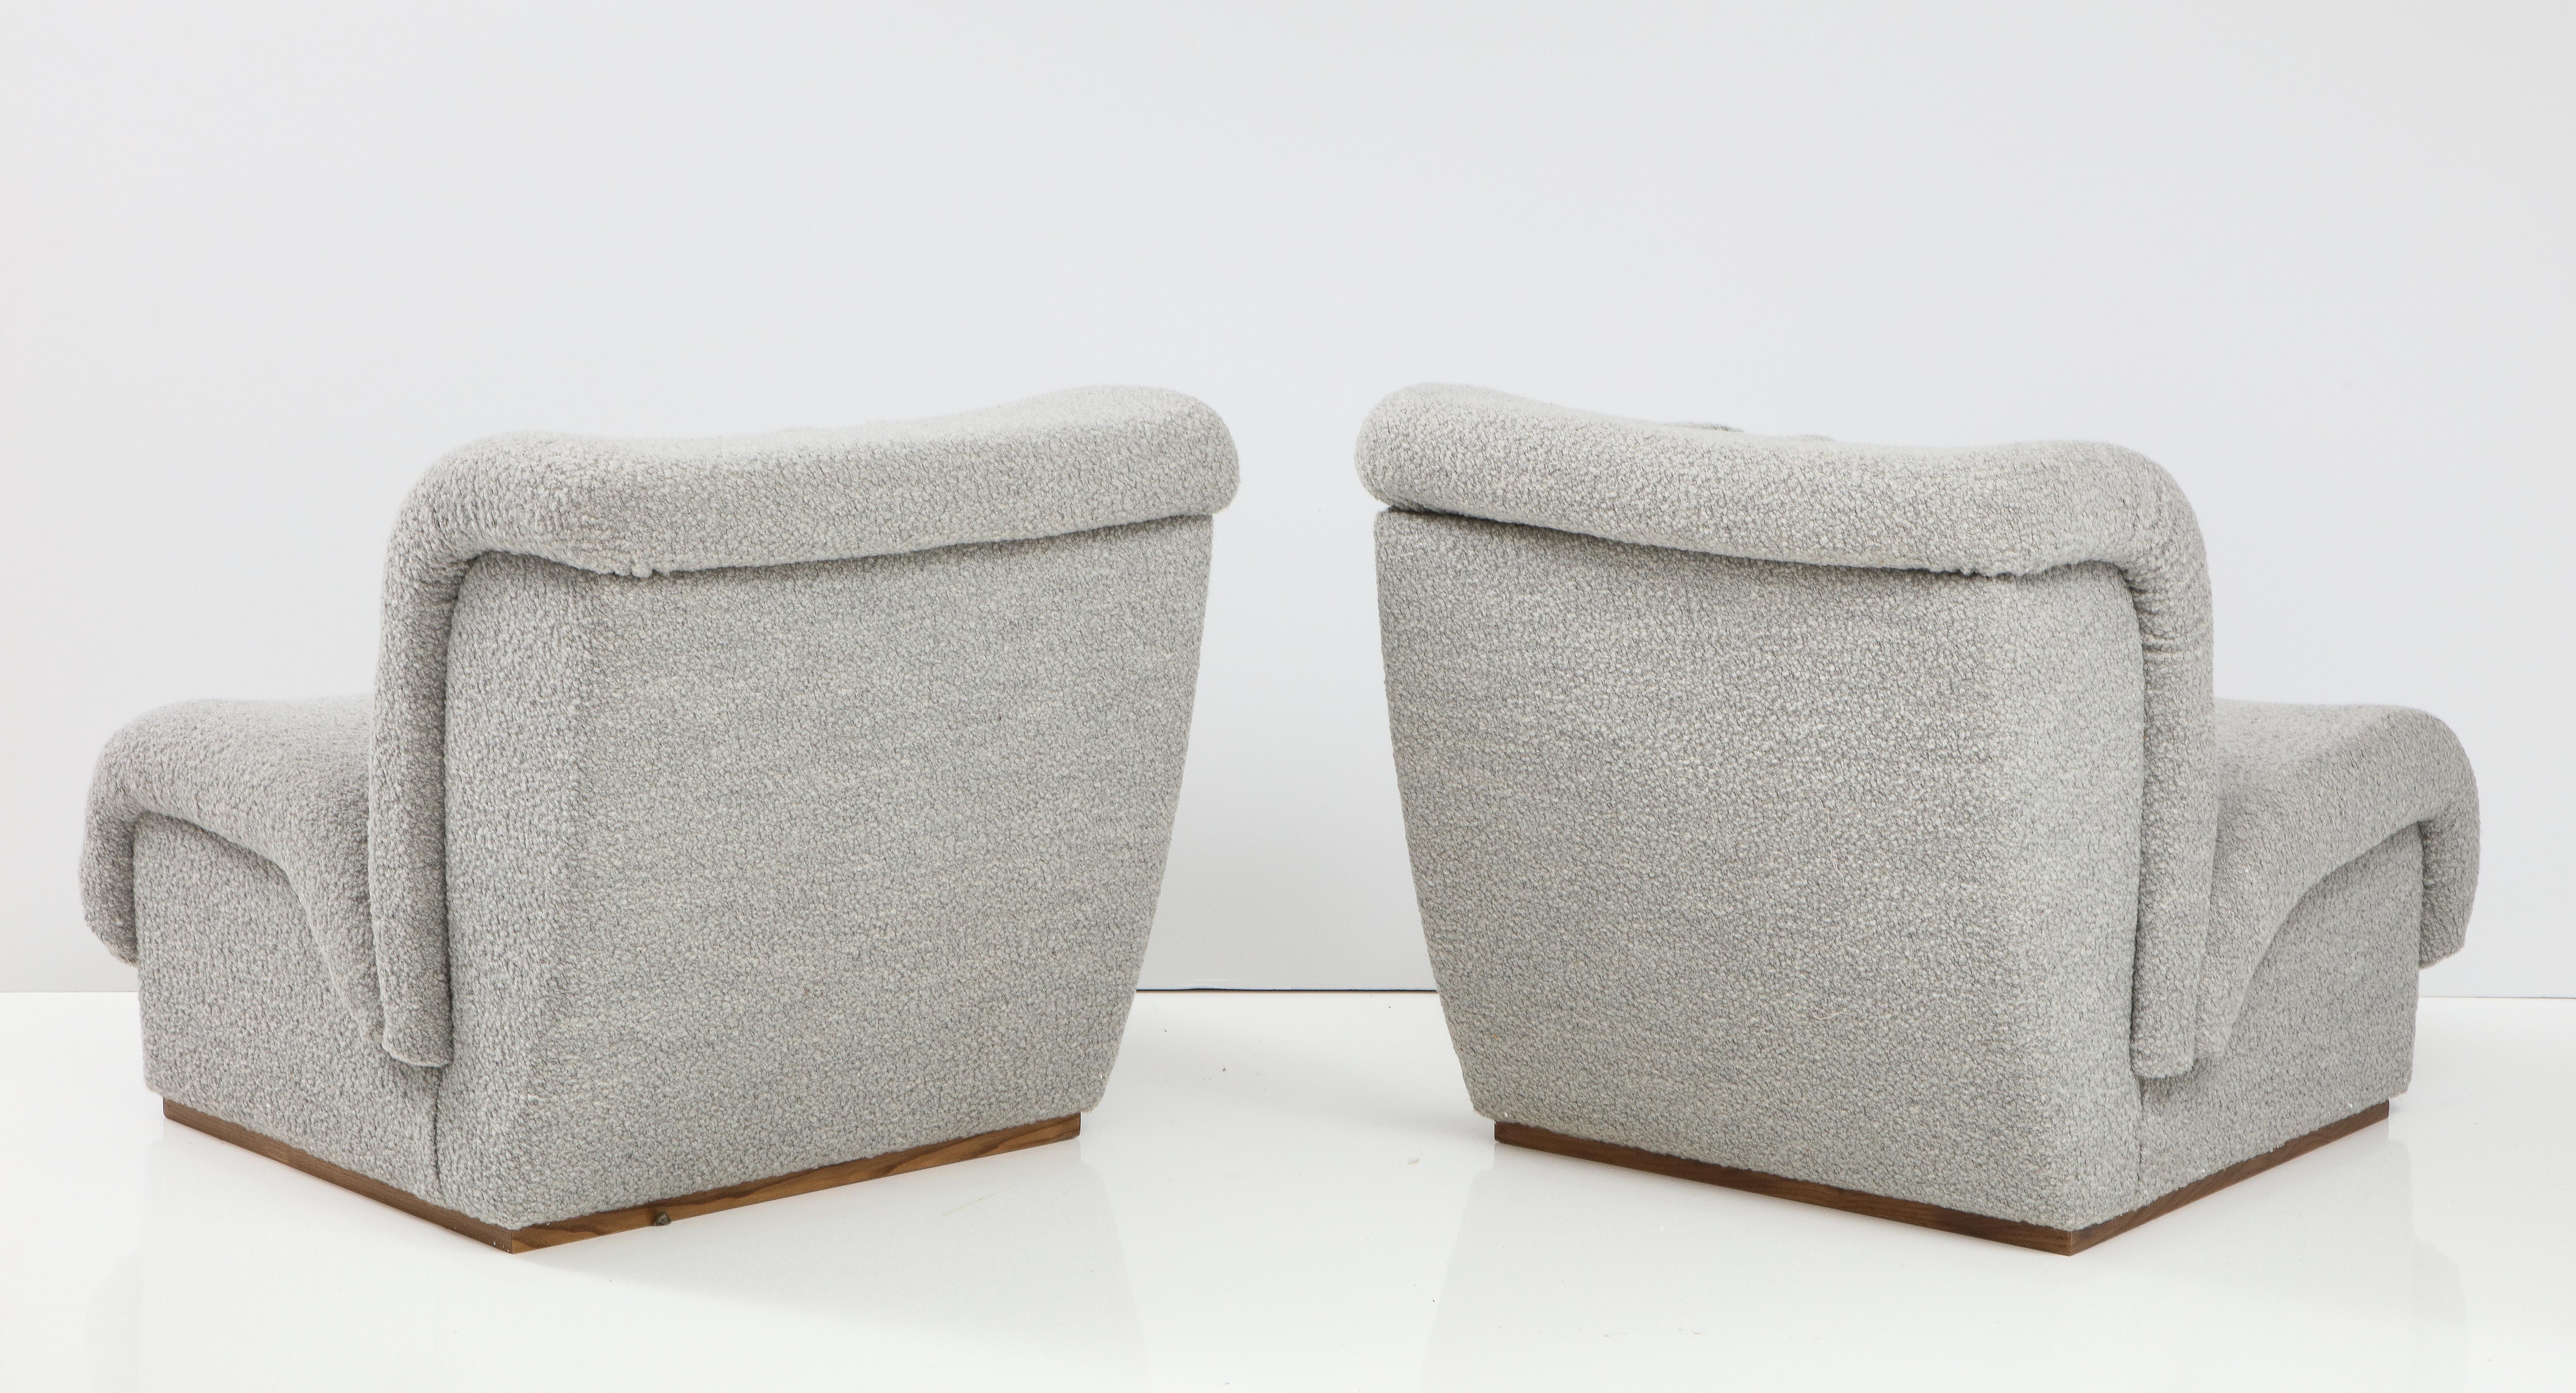 Pair of Slipper Lounge Chairs in Grey Boucle by Doimo Salotti, Italy, circa 1970 For Sale 1